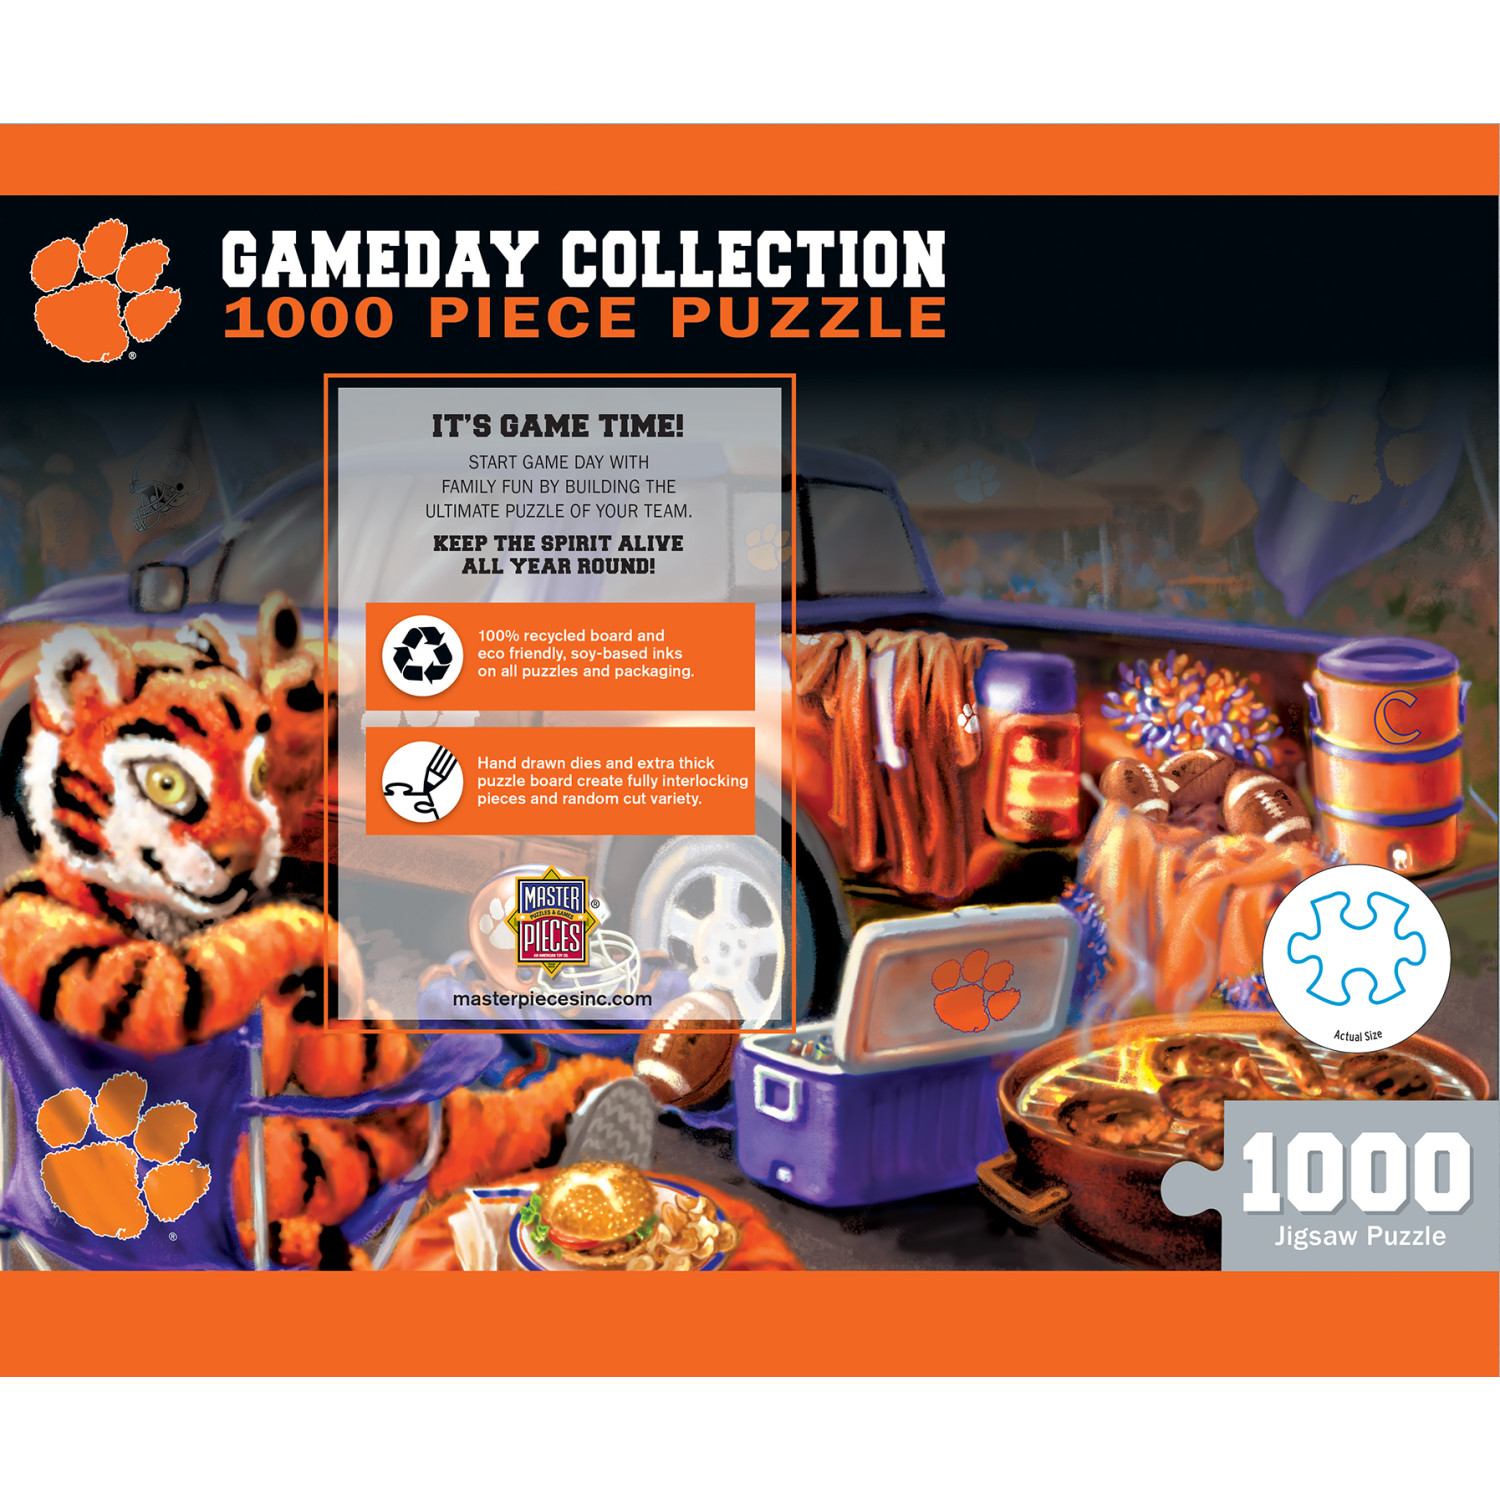 MasterPieces 1000 Piece Jigsaw Puzzle - NCAA Clemson Tigers Gameday - image 4 of 5